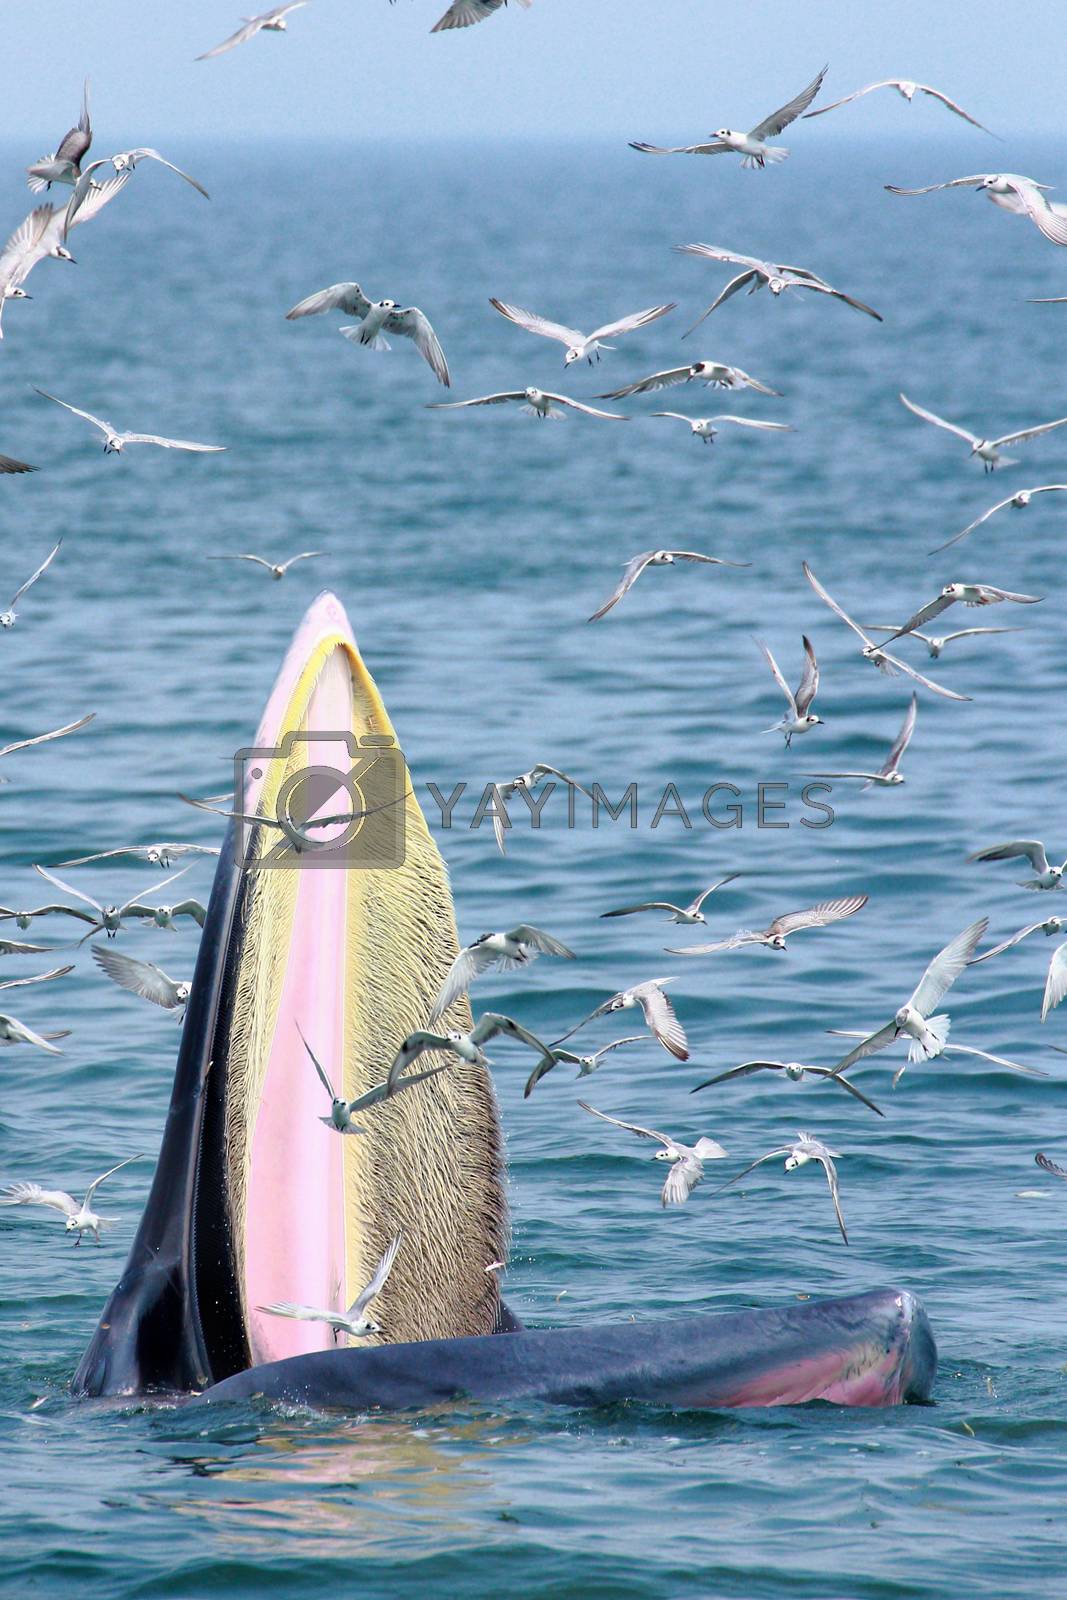 Royalty free image of bryde whale and seagull by happystock